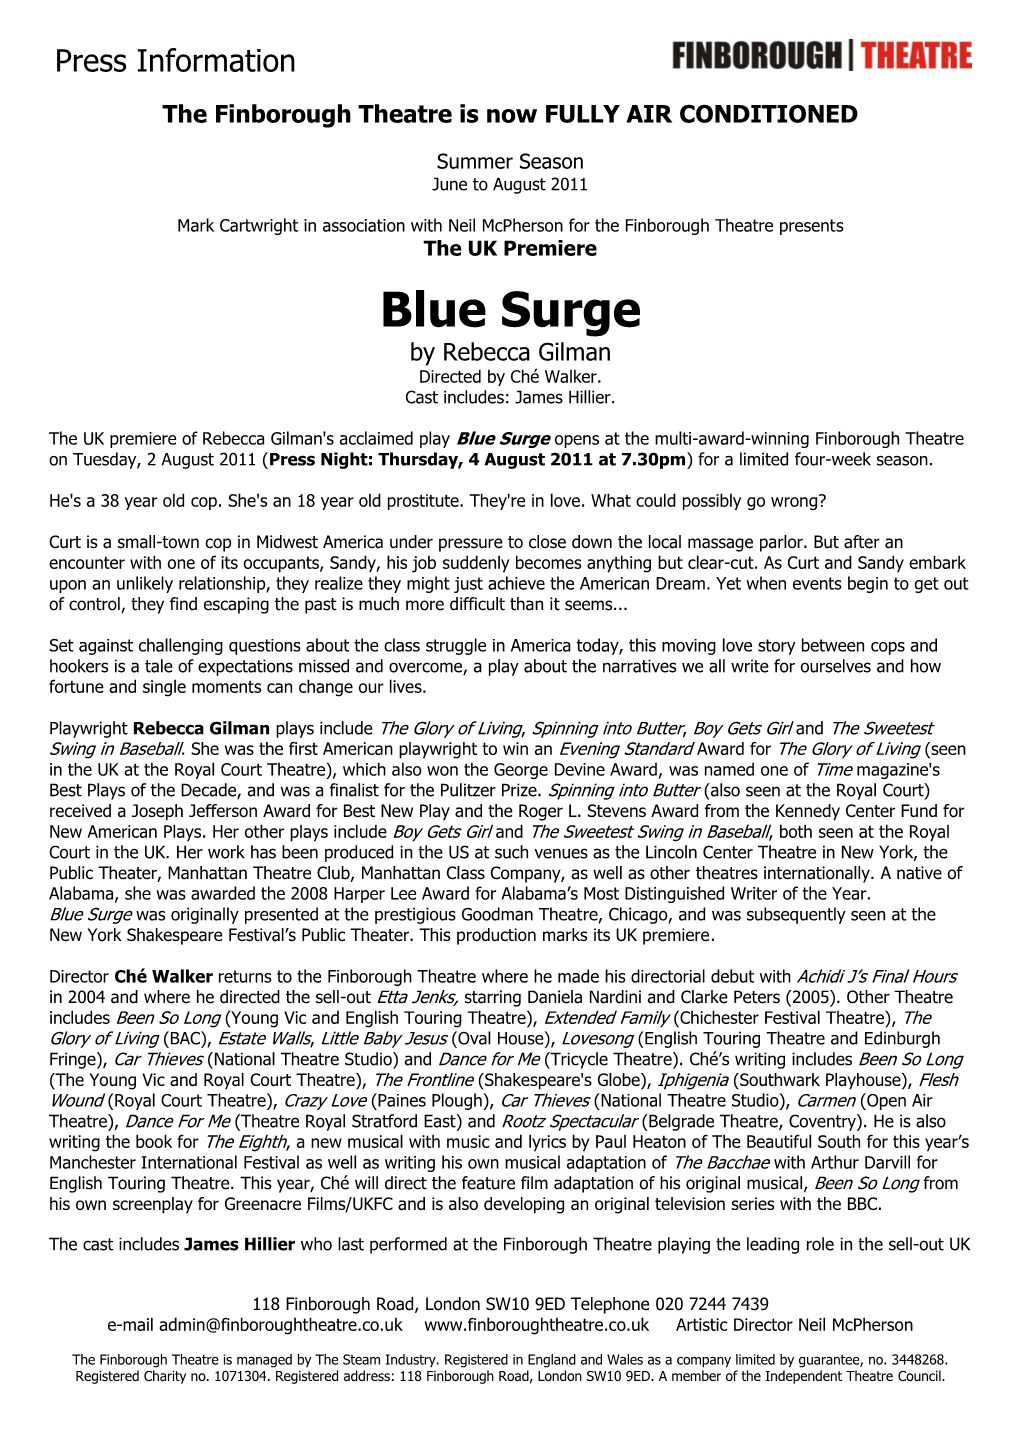 Blue Surge by Rebecca Gilman Directed by Ché Walker